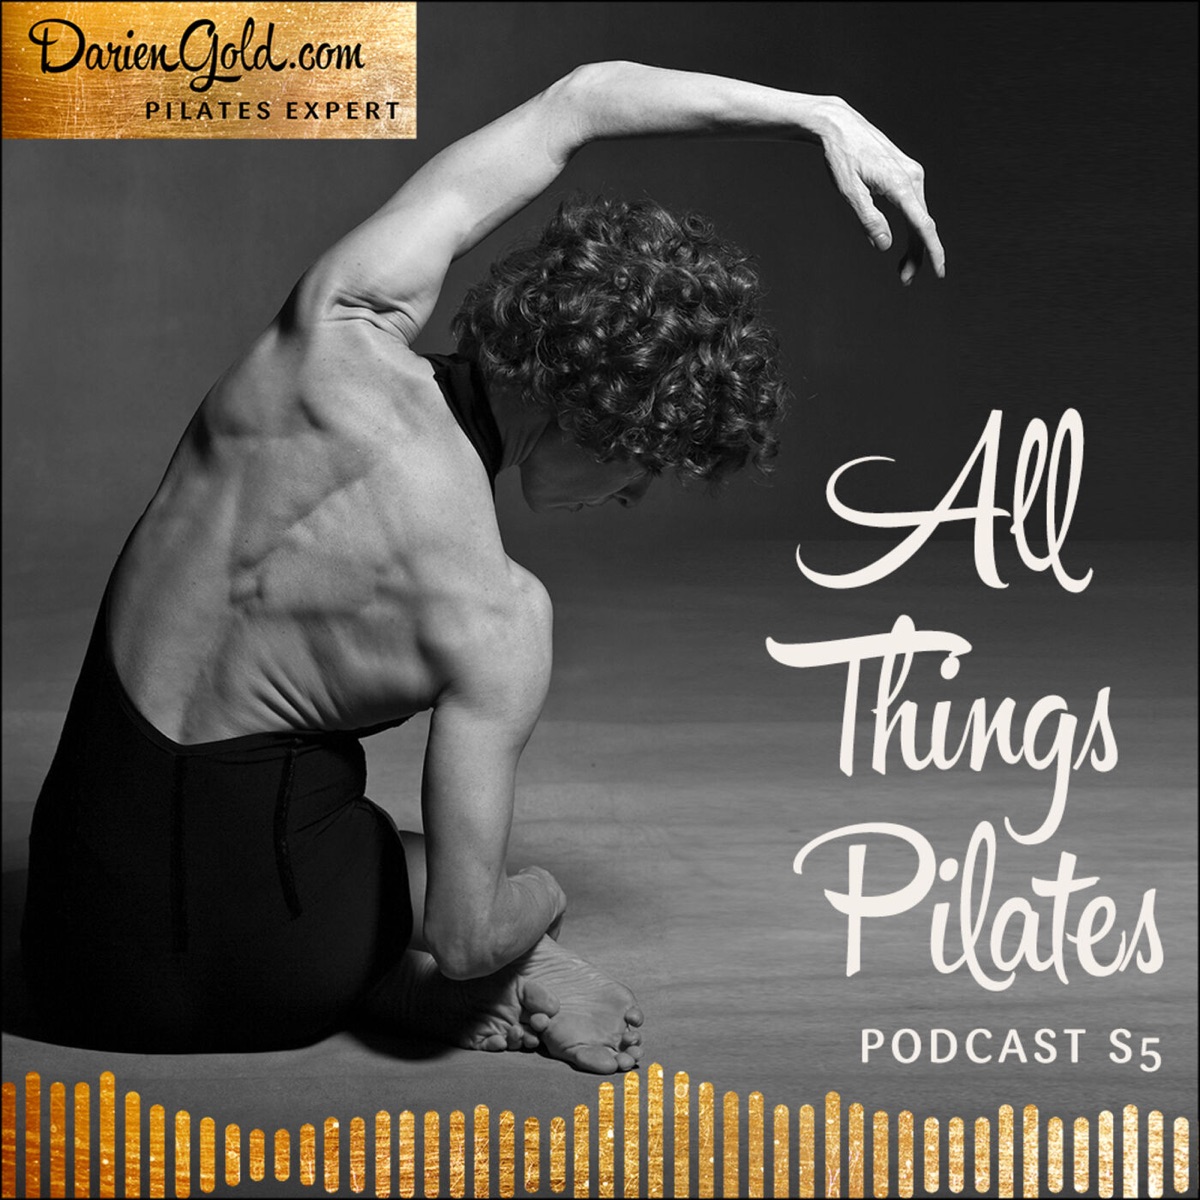 Dr. Spencer Stein ~ Orthopedic surgeon – All Things Pilates with